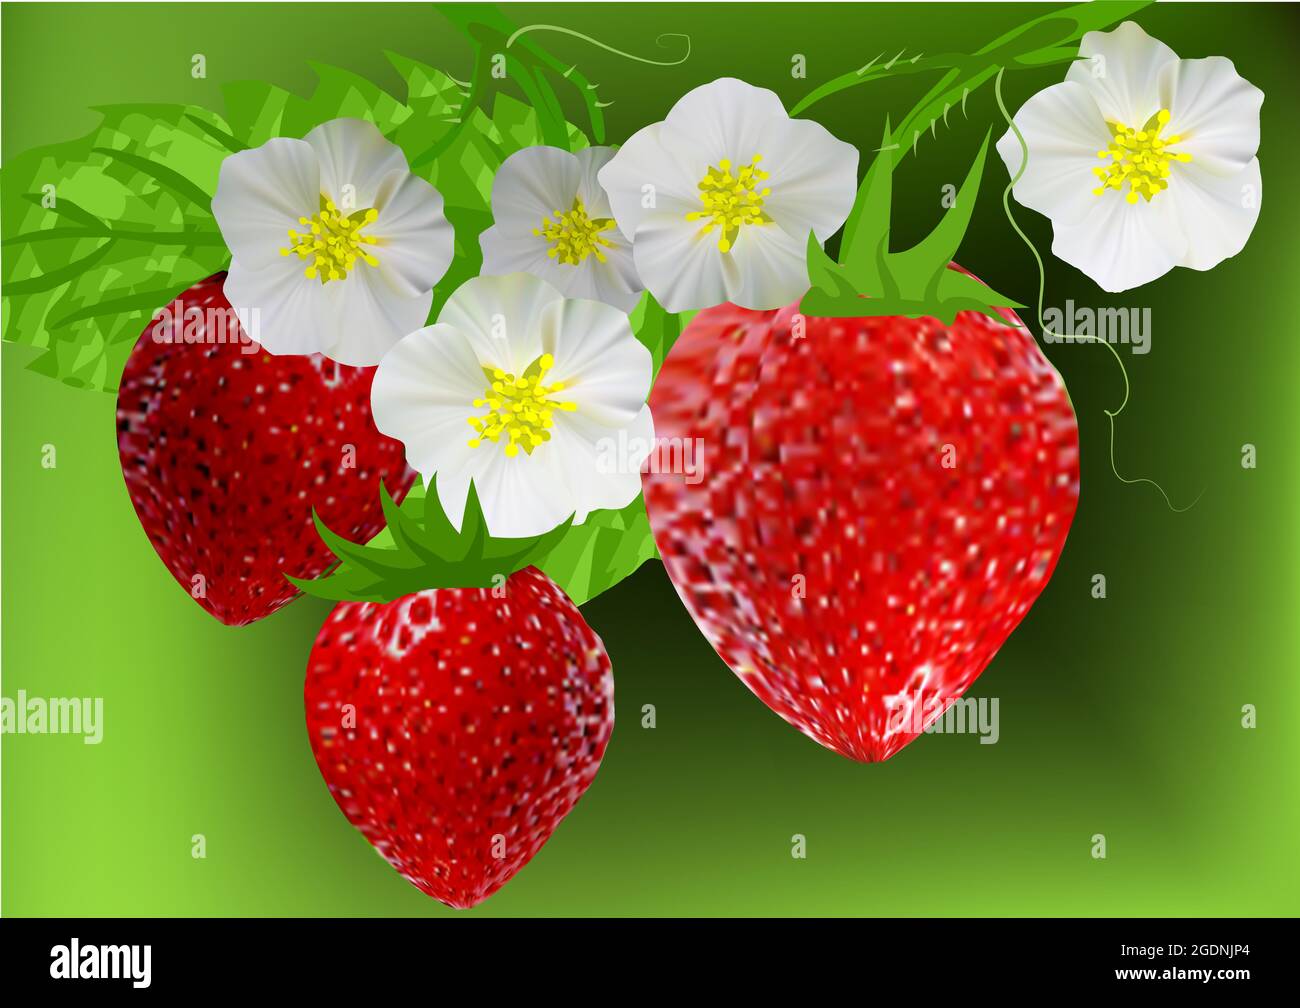 strawberry vector illustration on green background Stock Vector